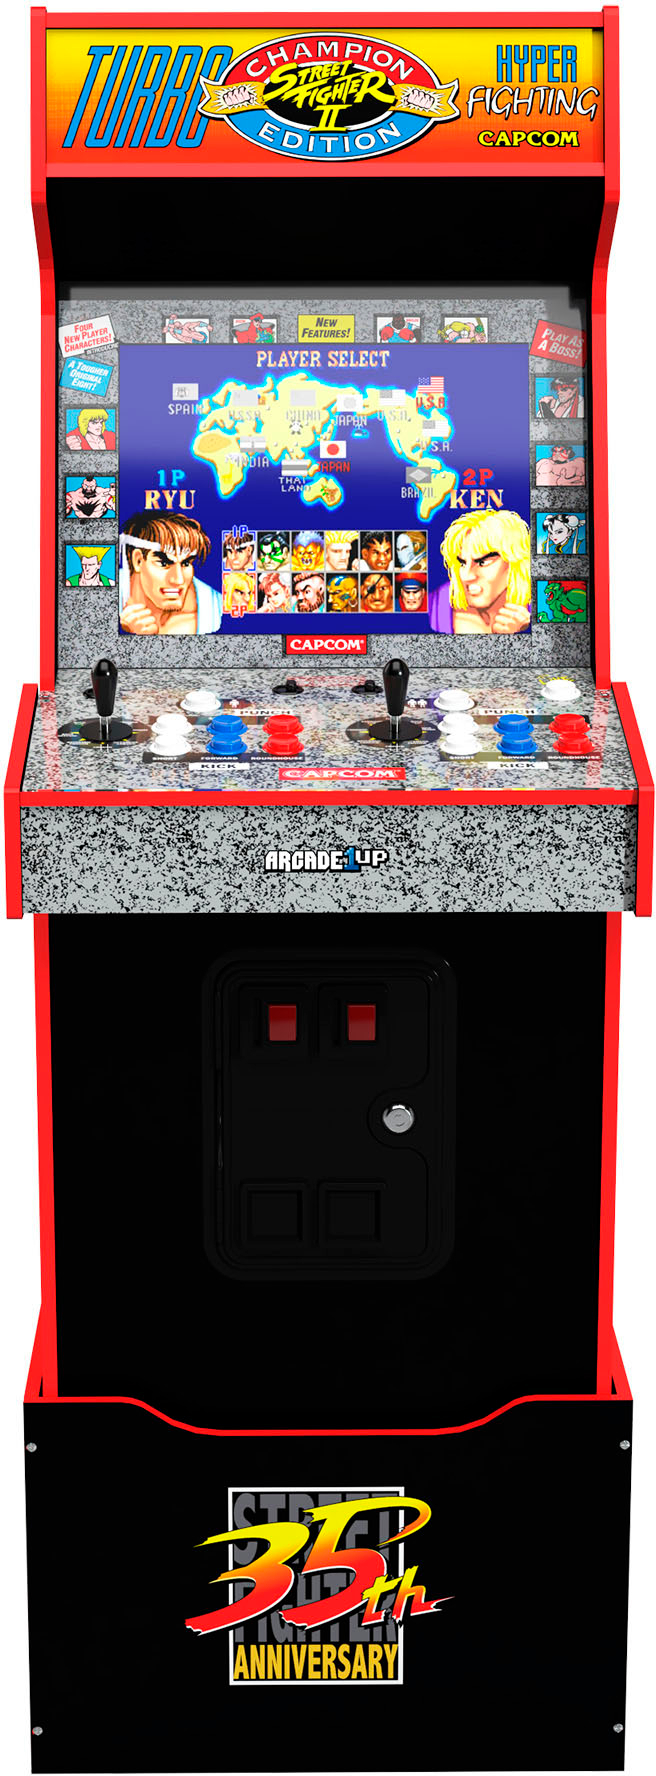 STREET FIGHTER II ARCADE MACHINE by CAPCOM 1991 (Excellent Condition)